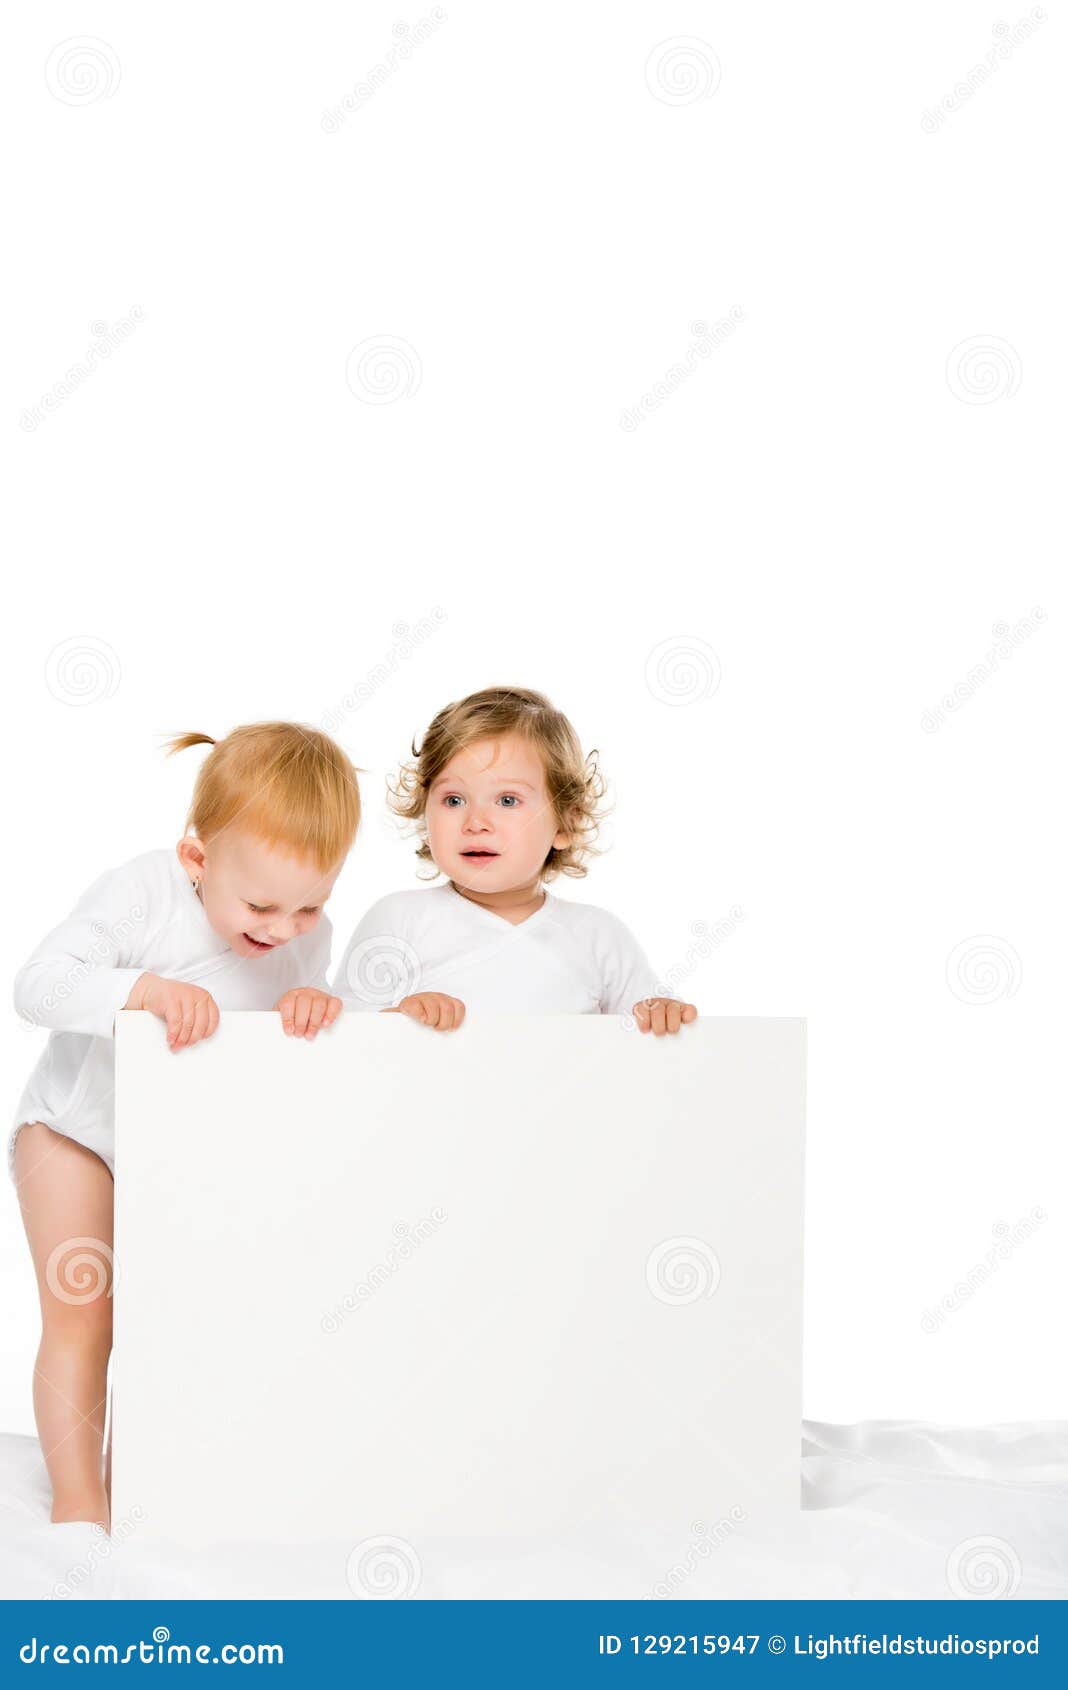 Cute Toddlers Holding Empty Banner Stock Image - Image of ...